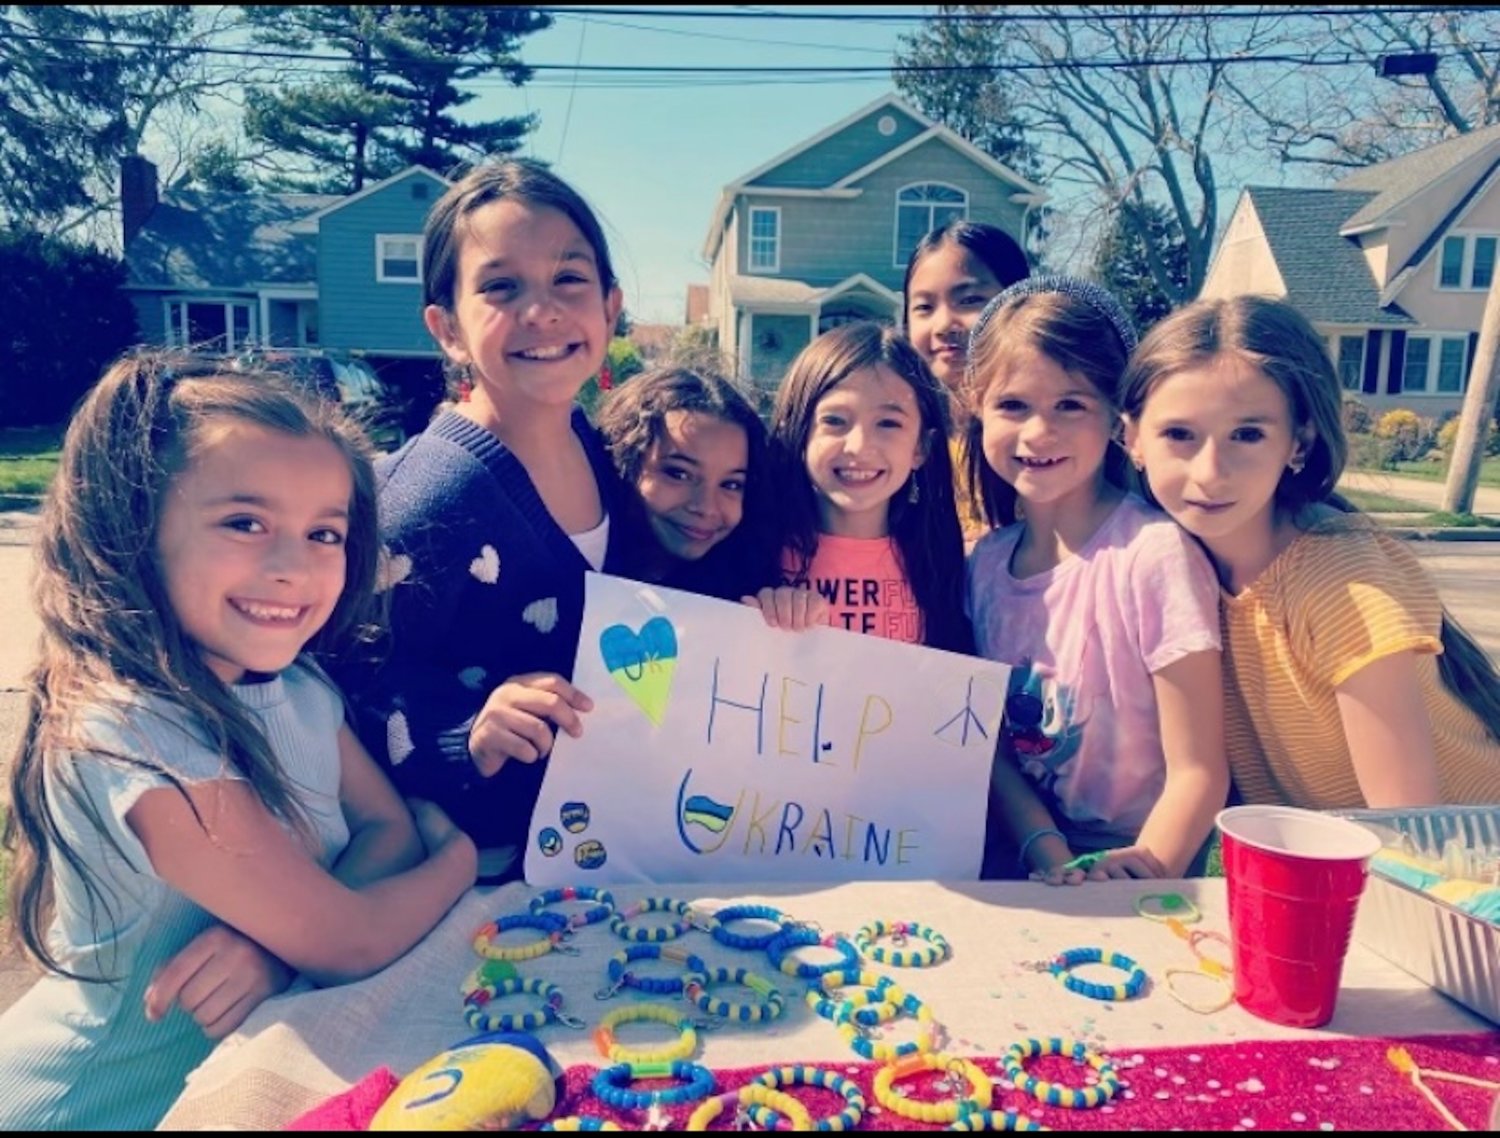 Seven third-graders from Centre Avenue Elementary School got together to host a fundraiser to purchase teddy bears for children in Ukraine. Taking part were, from left, Olivia Santora, Scarlett Quiroz, Isabella Posner, Avery Goldfat, Katie Lam, Scarlett Lieb and Brooke Olsen.